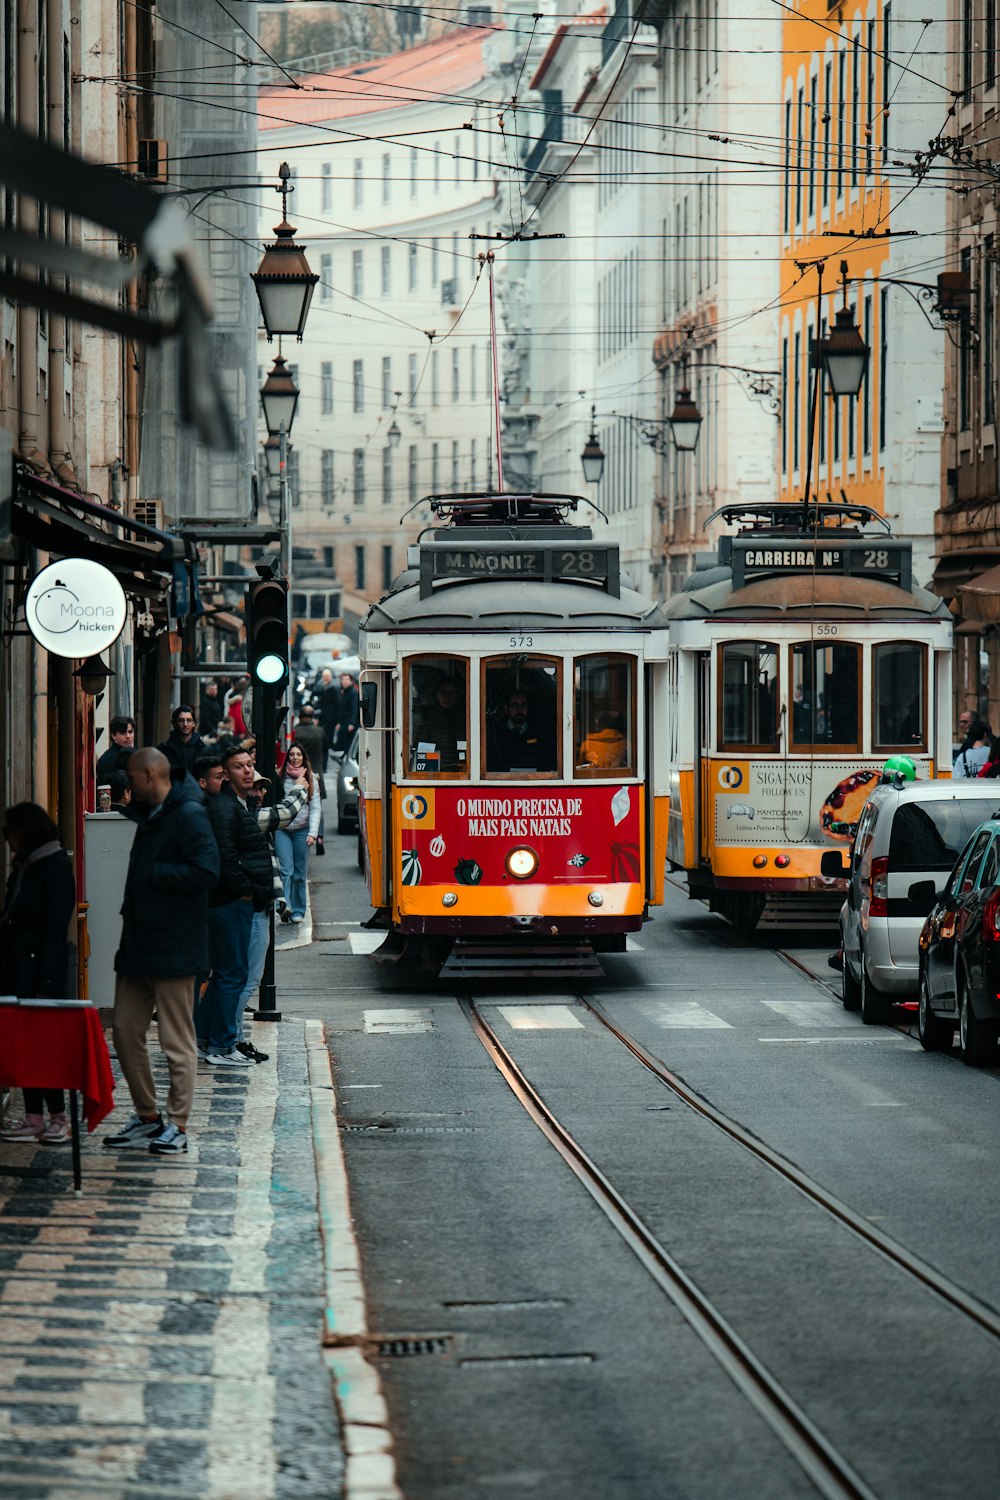 a red and yellow trolley on a city street